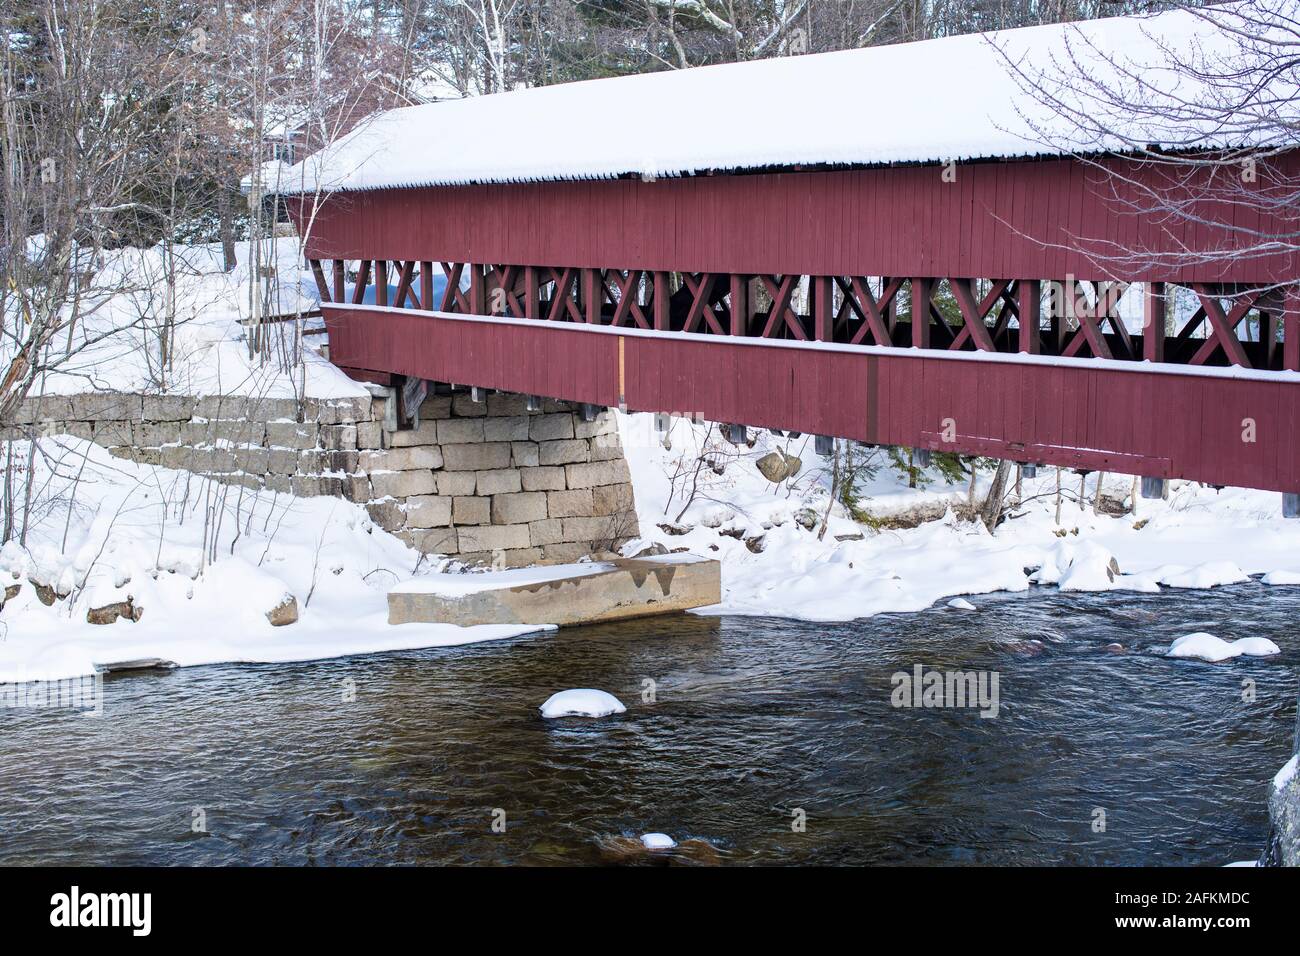 Built in 1869 and restored in 1991, it is NH's Covered Bridge number 47. Original bridge was lifted from abutments by flood waters in 1869. It floated Stock Photo